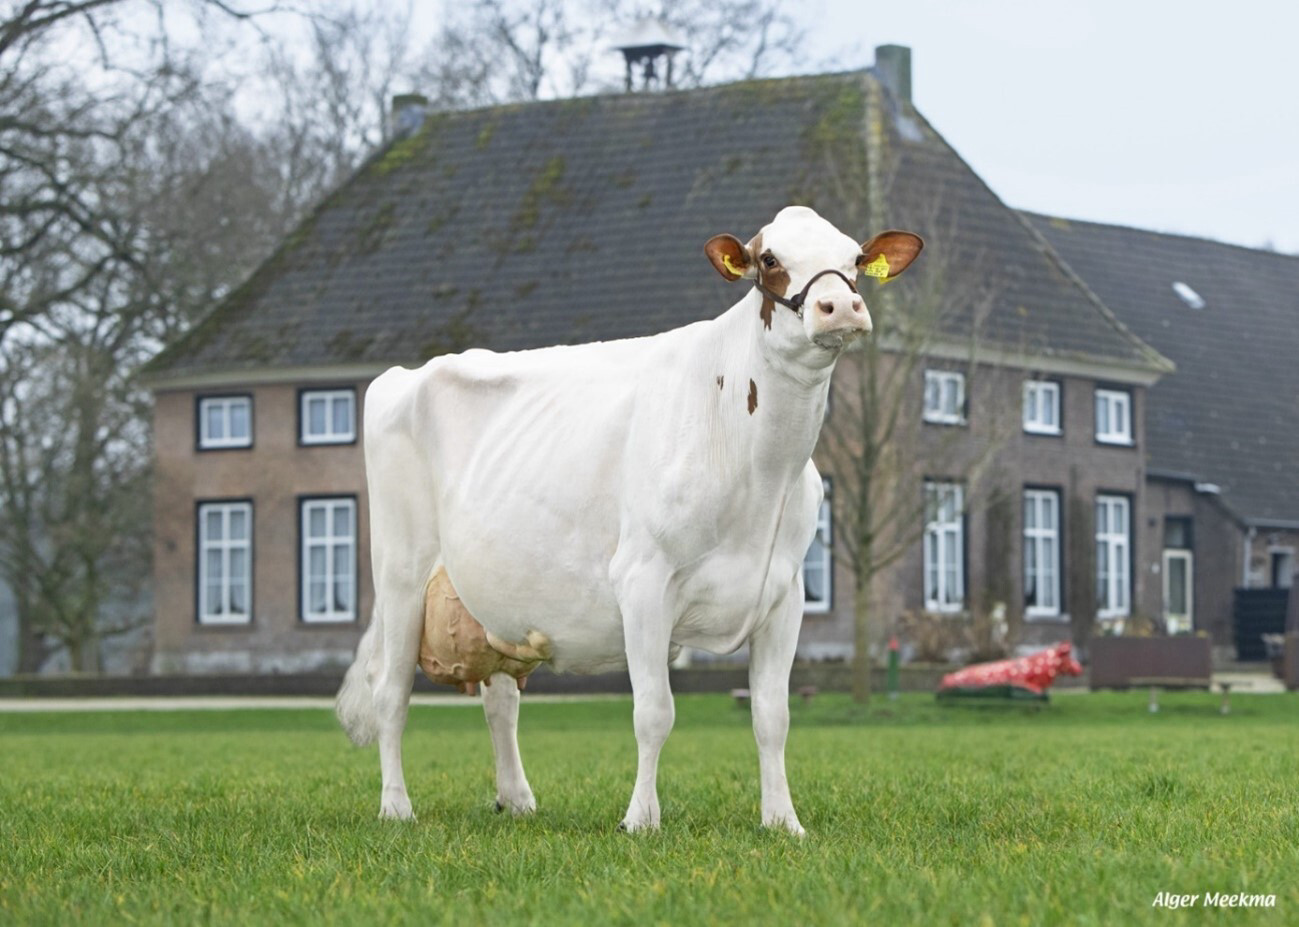 Barendonk Holstein cow, 100-tonner in front of the farm